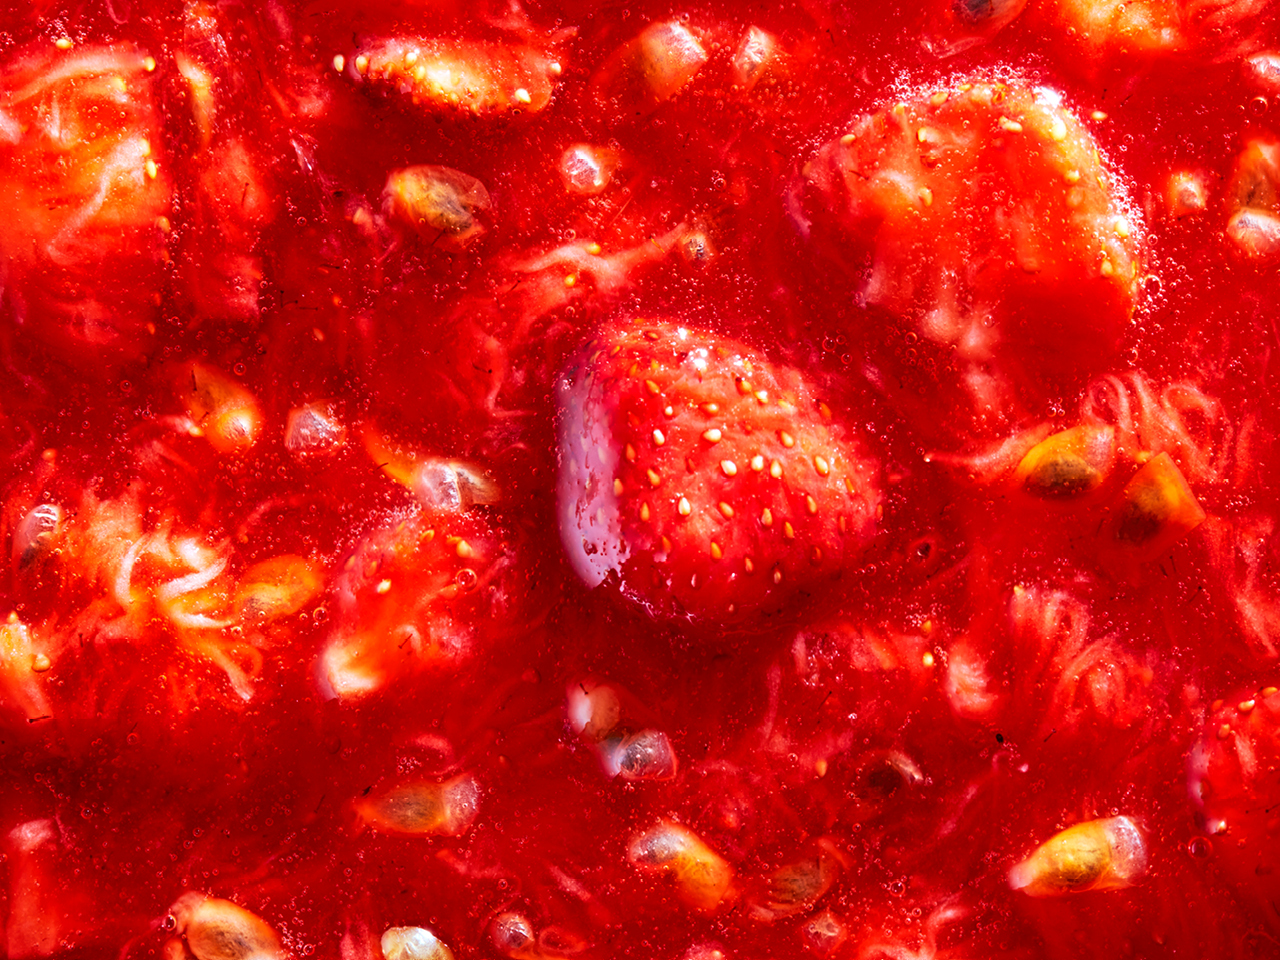 An extreme close-up photo of strawberry jam